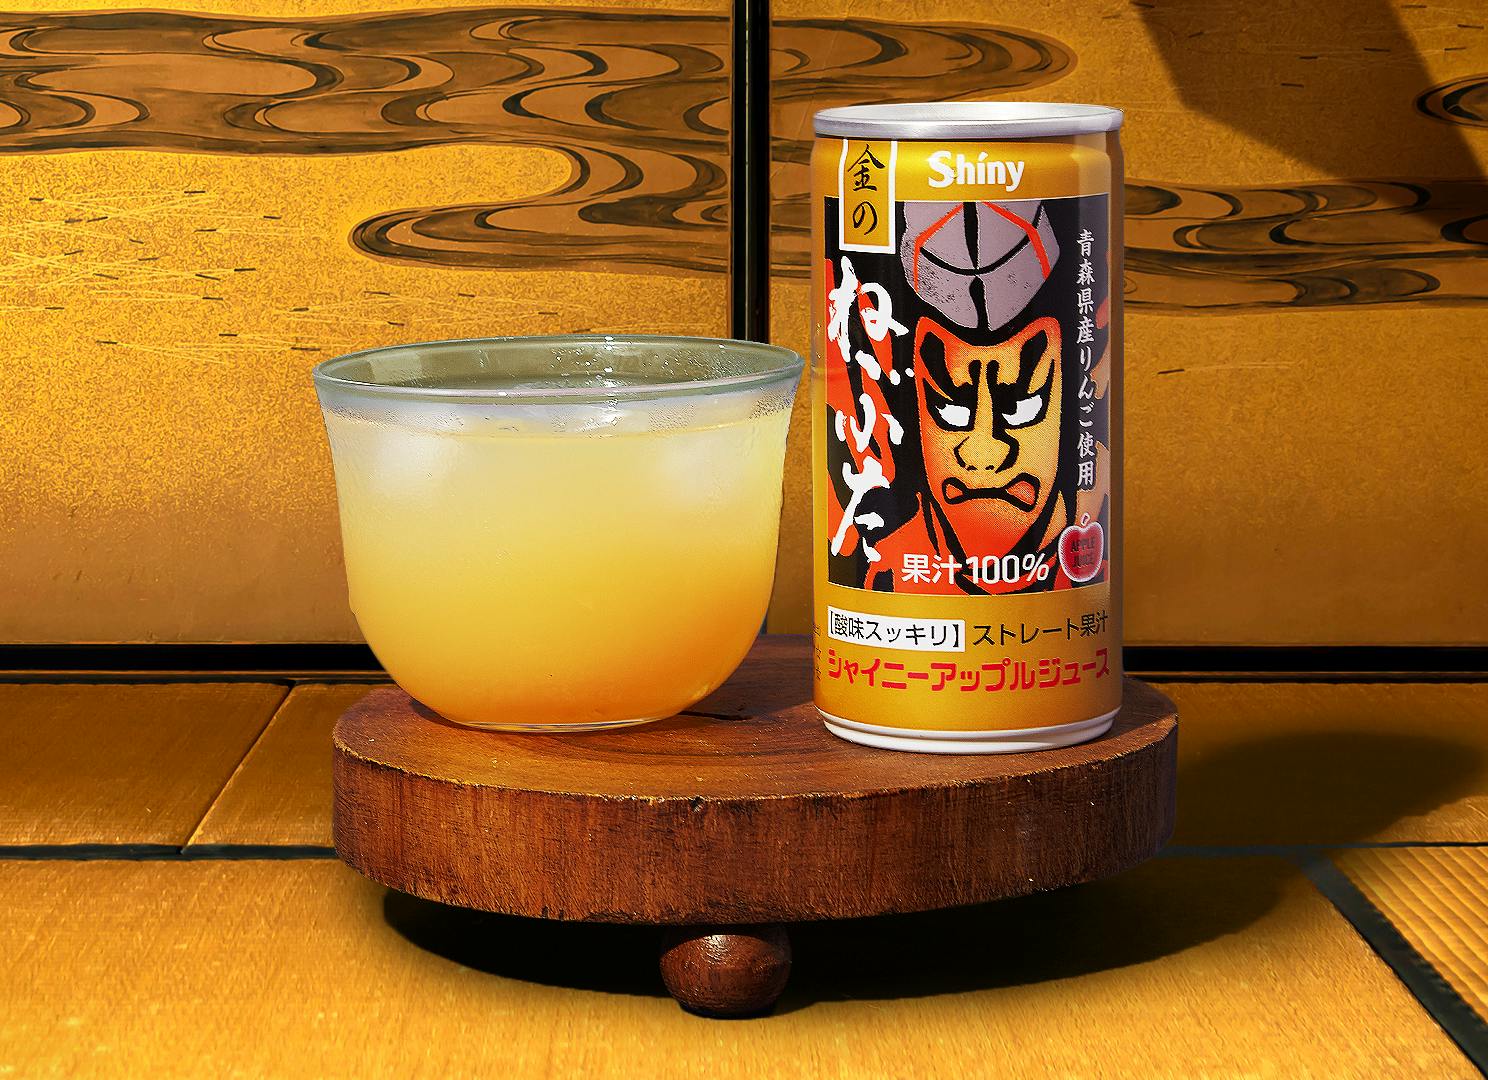 Gold Nebuta Apple Juice sits in a tatami-lined traditional Japanese room.